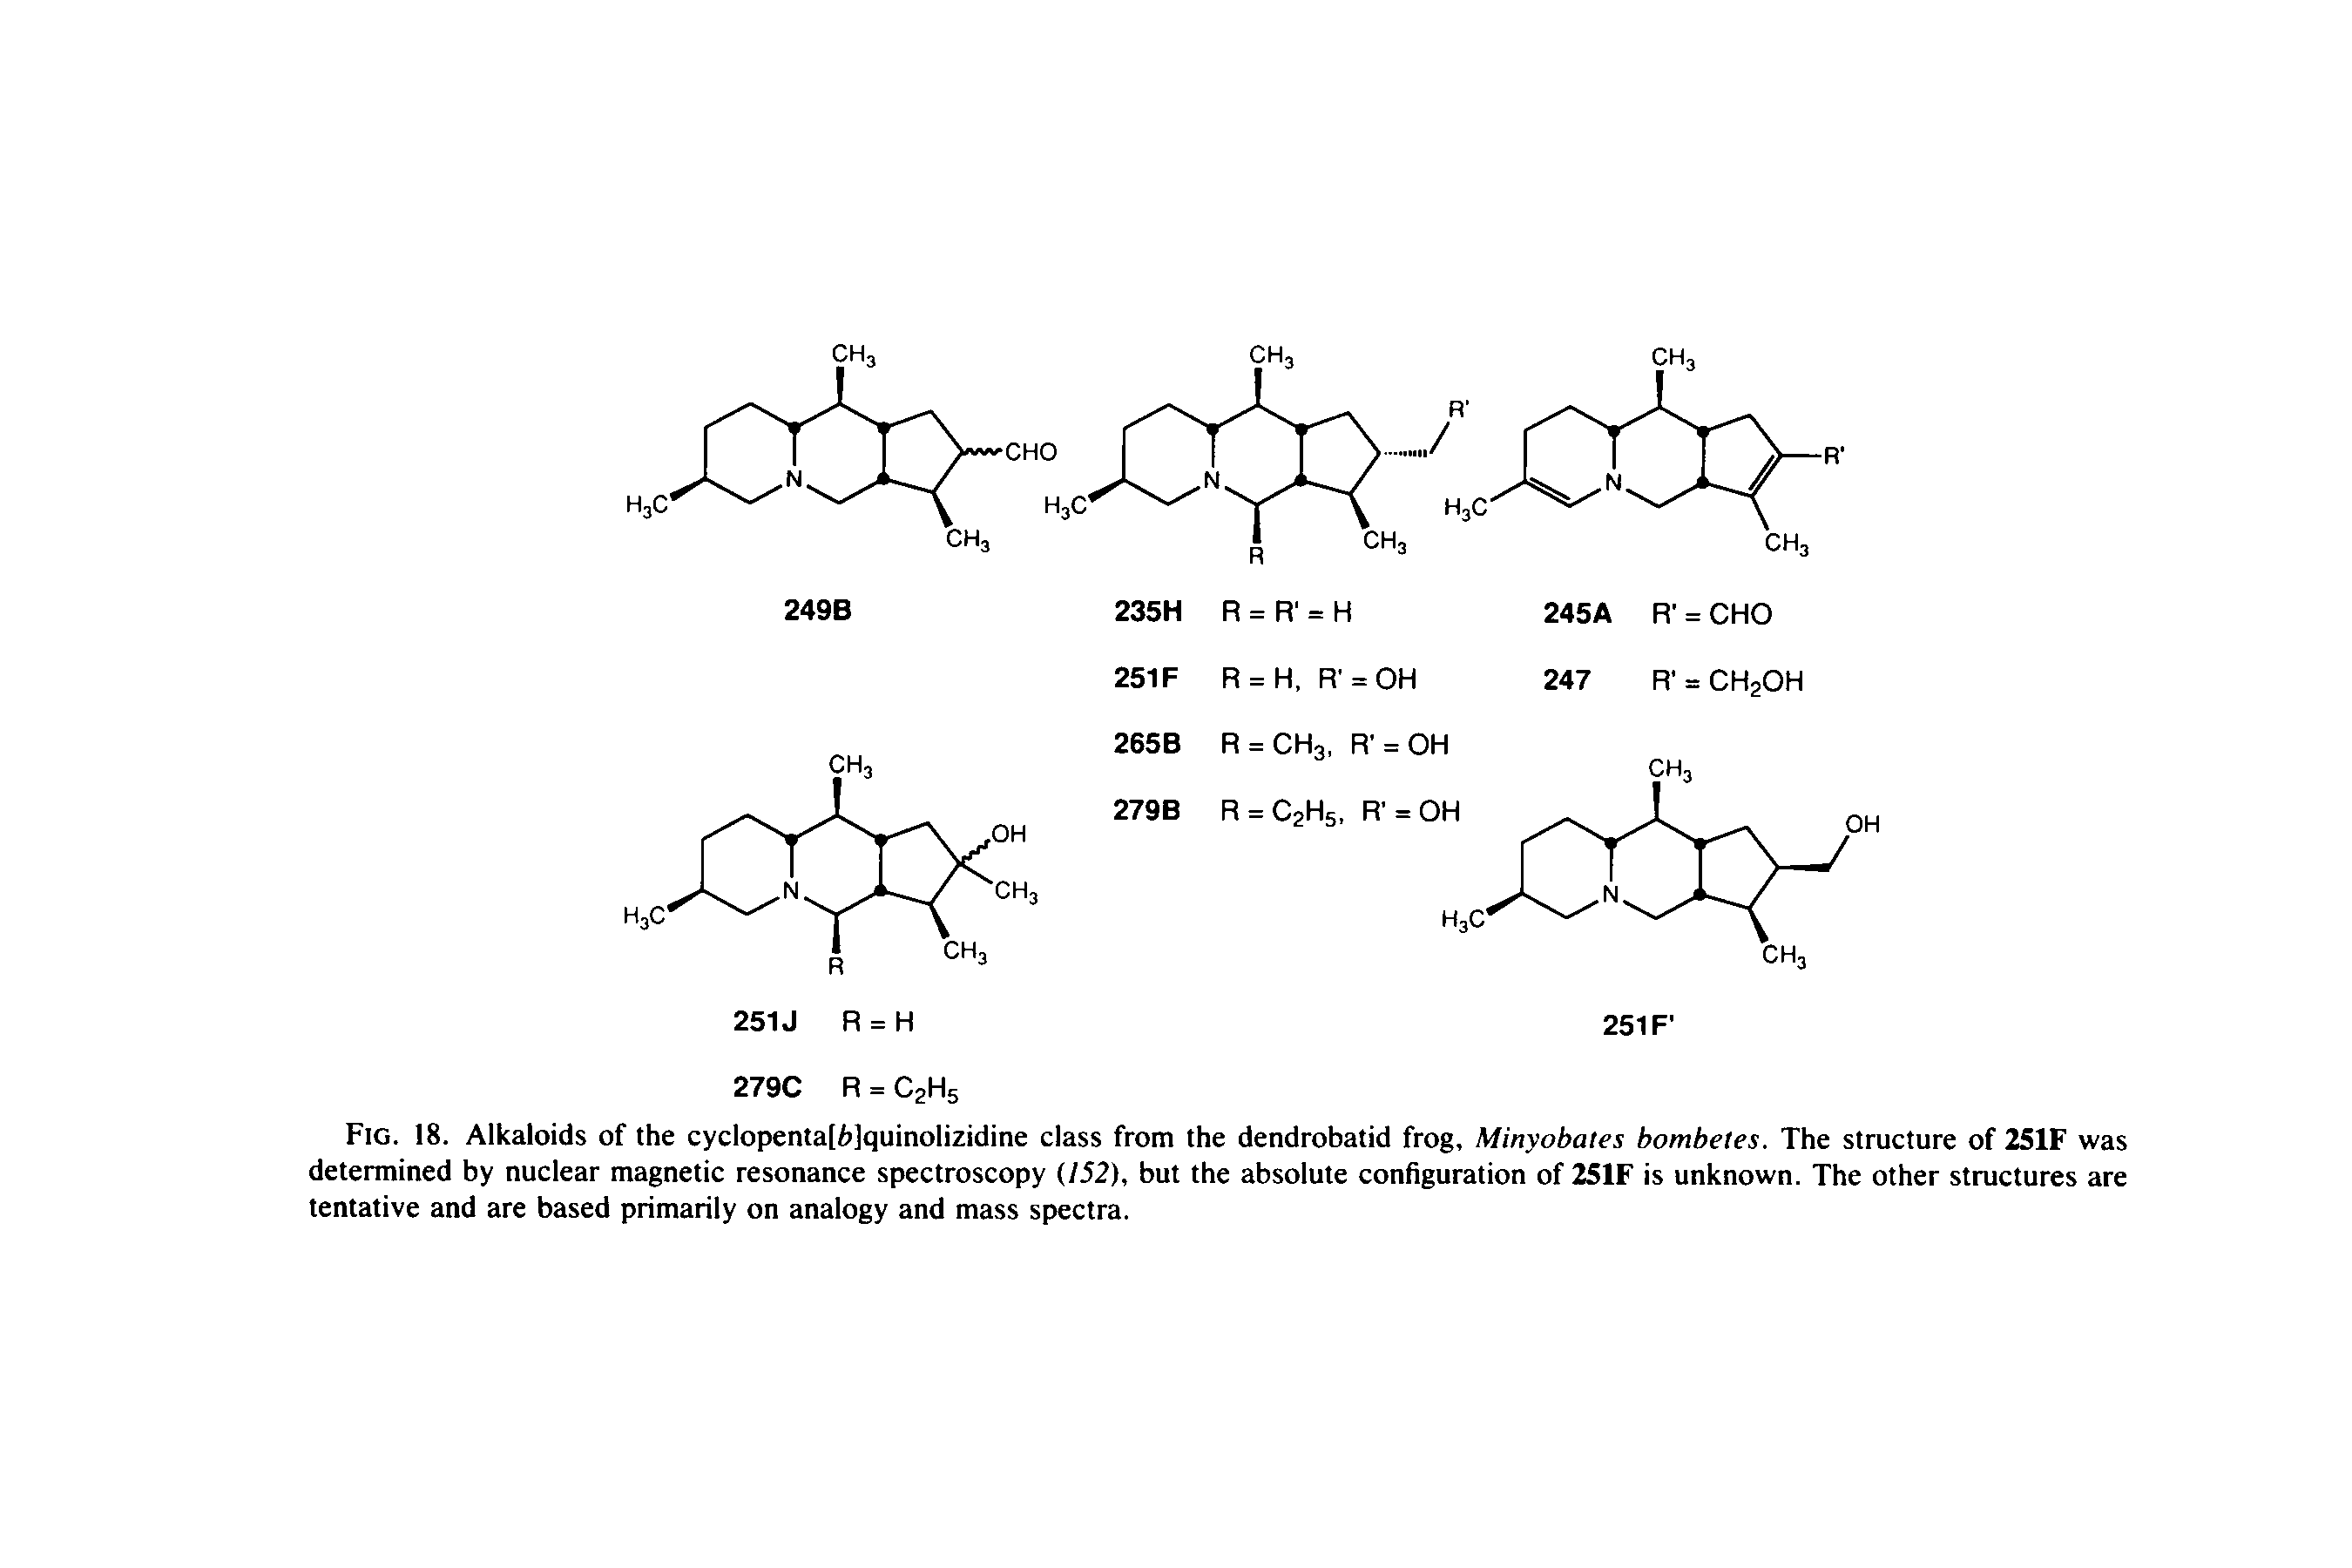 Fig. 18. Alkaloids of the cyclopentaf/ilquinolizidine class from the dendrobatid frog, Minyobates bombetes. The structure of 251F was determined by nuclear magnetic resonance spectroscopy (/52), but the absolute configuration of 2S1F is unknown. The other structures are tentative and are based primarily on analogy and mass spectra.